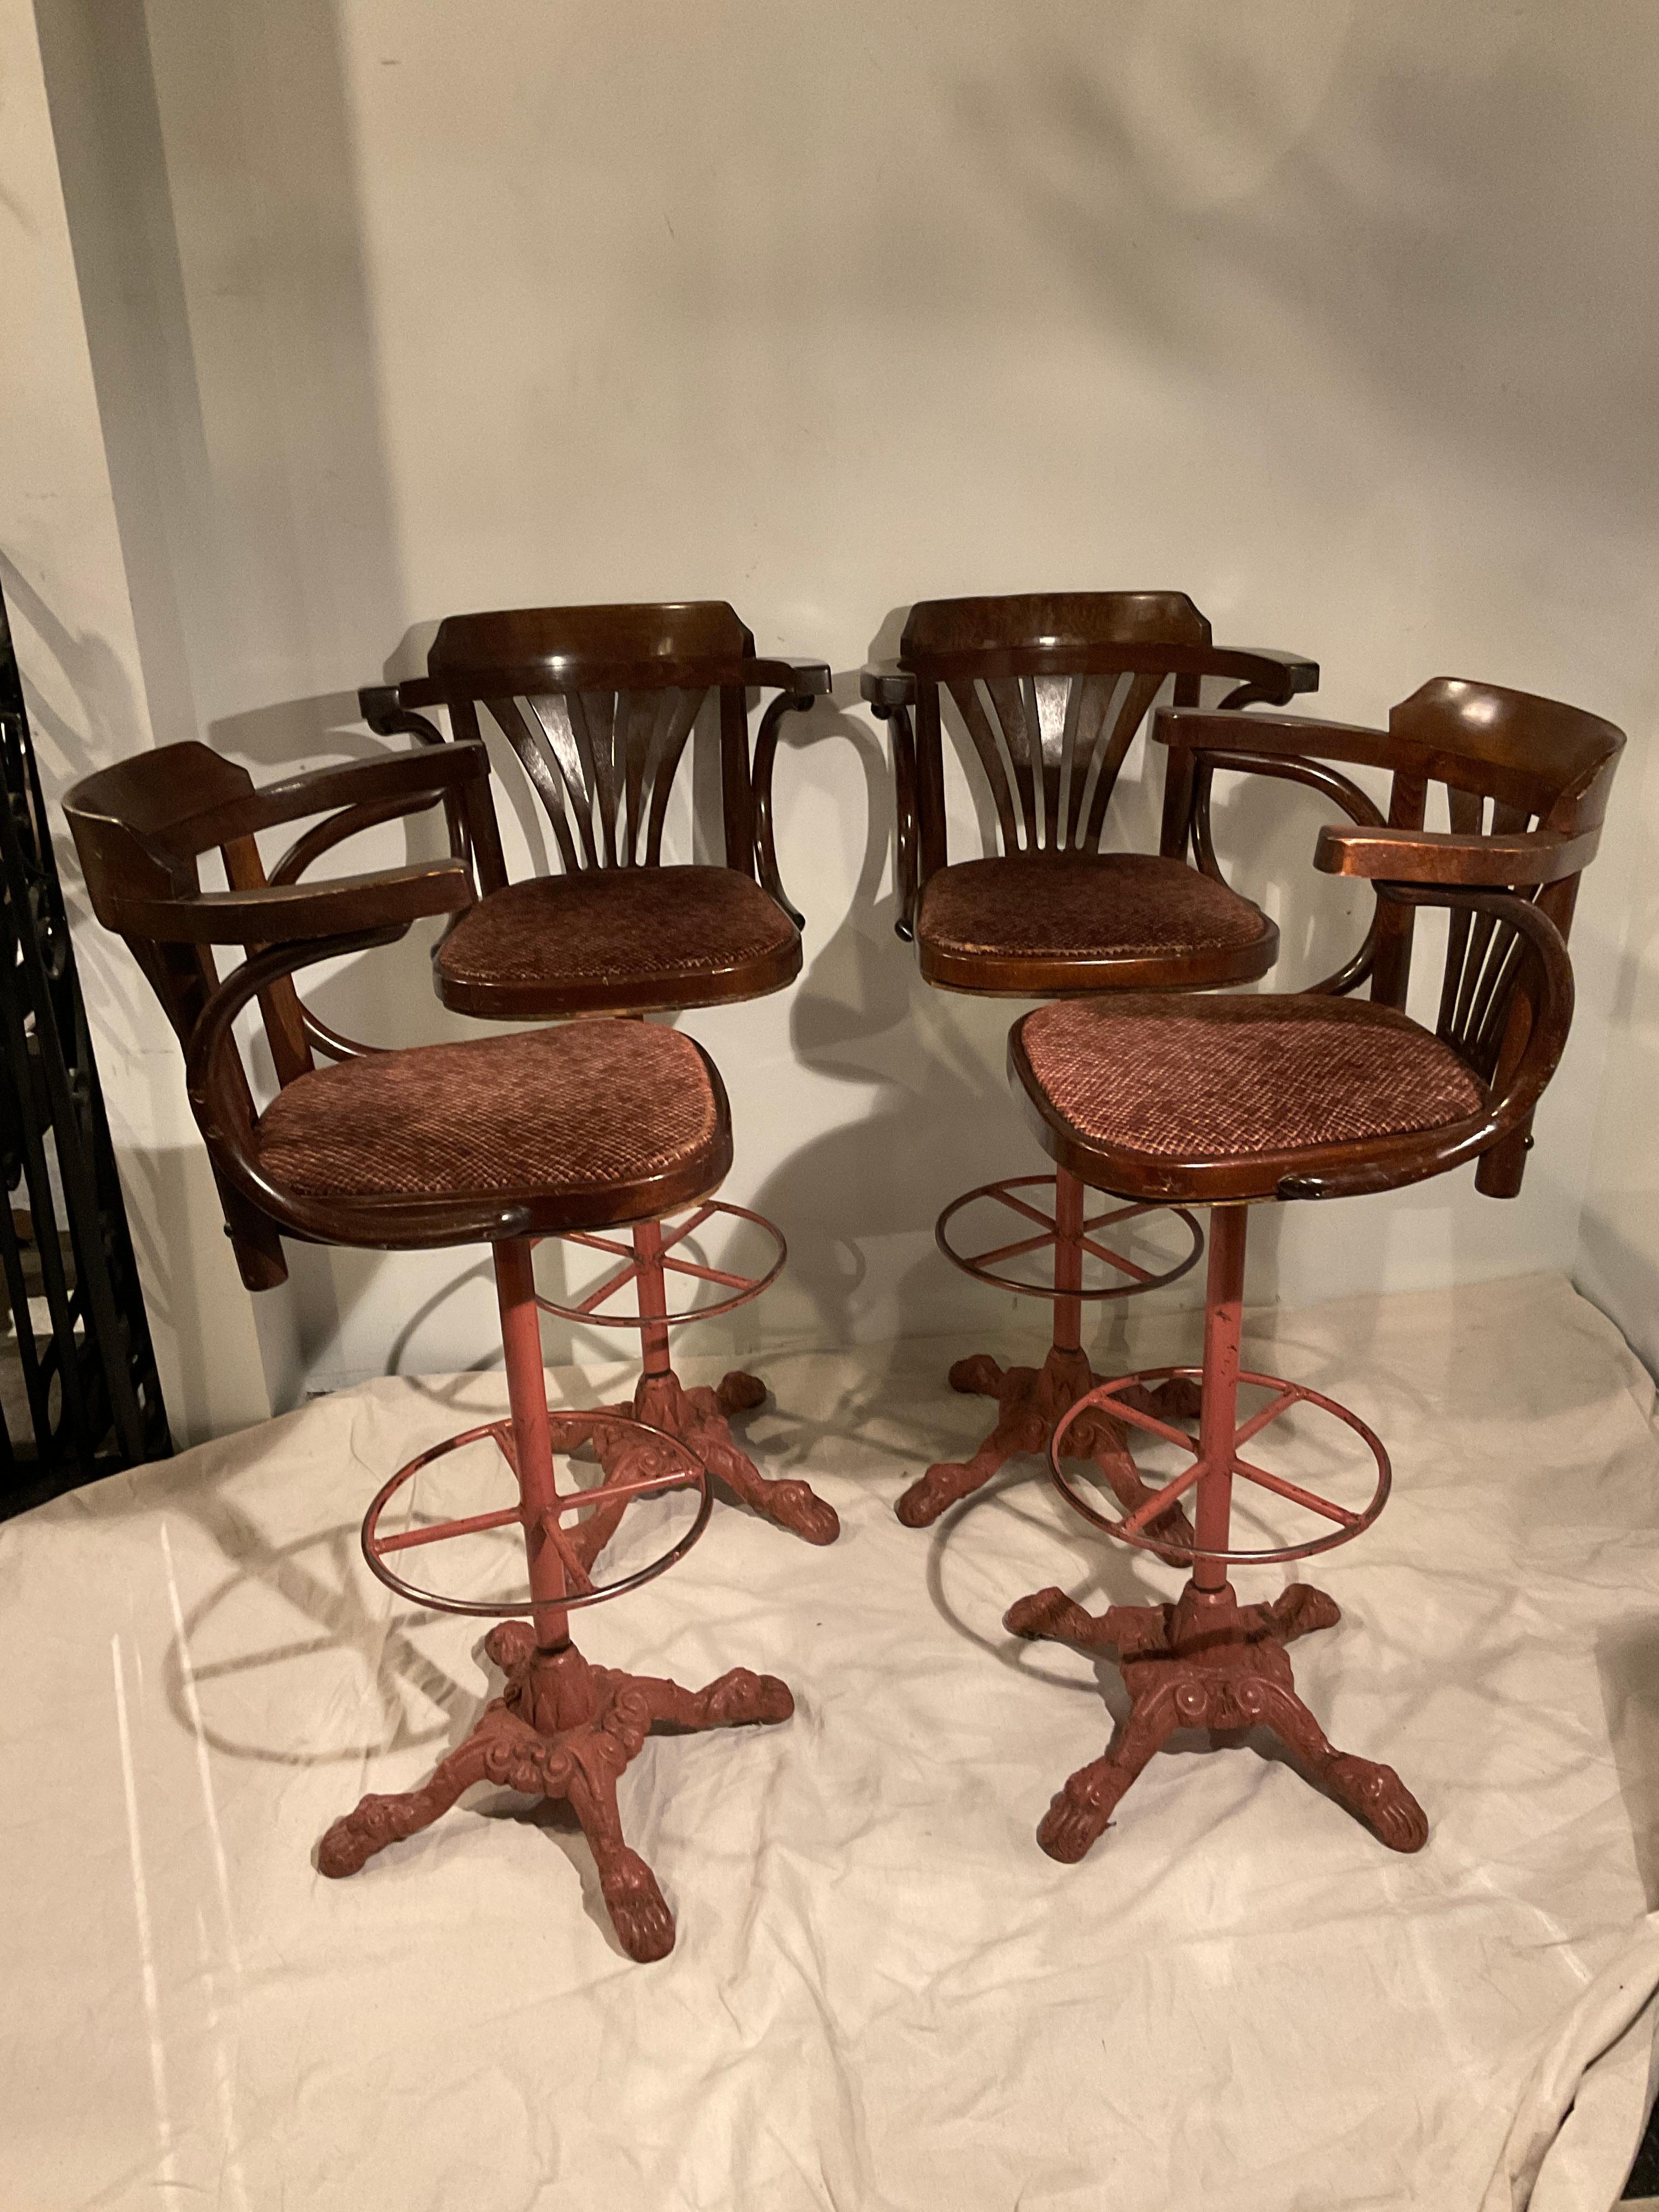 Four 1920s wood swivel bar stools on iron bases. One chair has veneer missing, as shown in image 2.